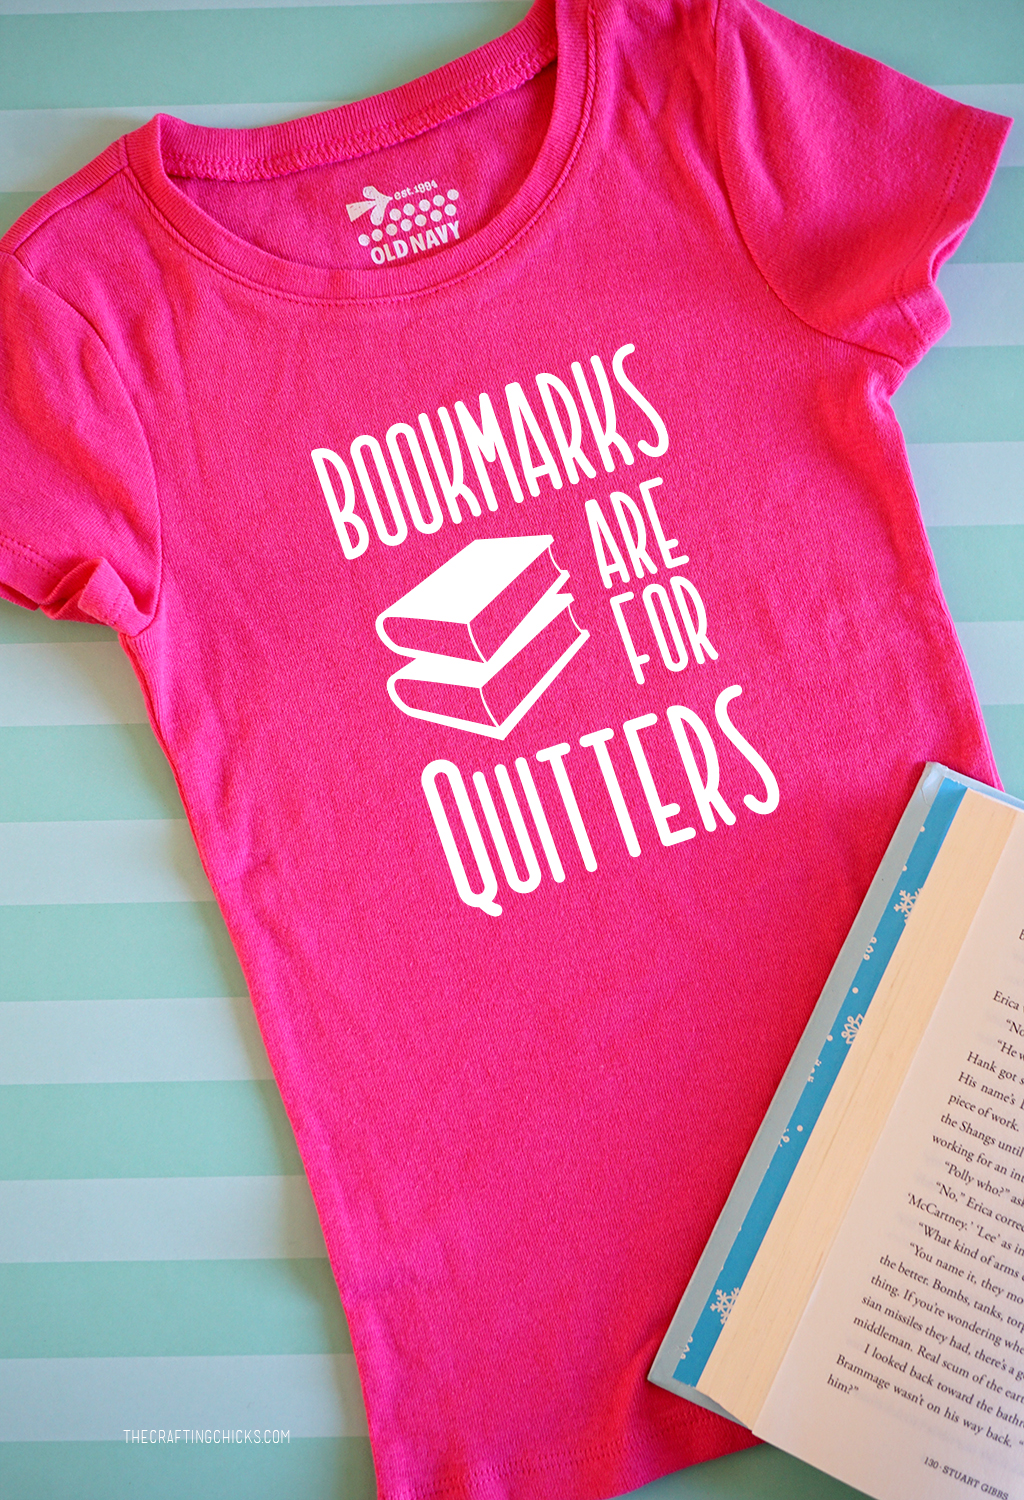 Bookmarks are for Quitters shirt